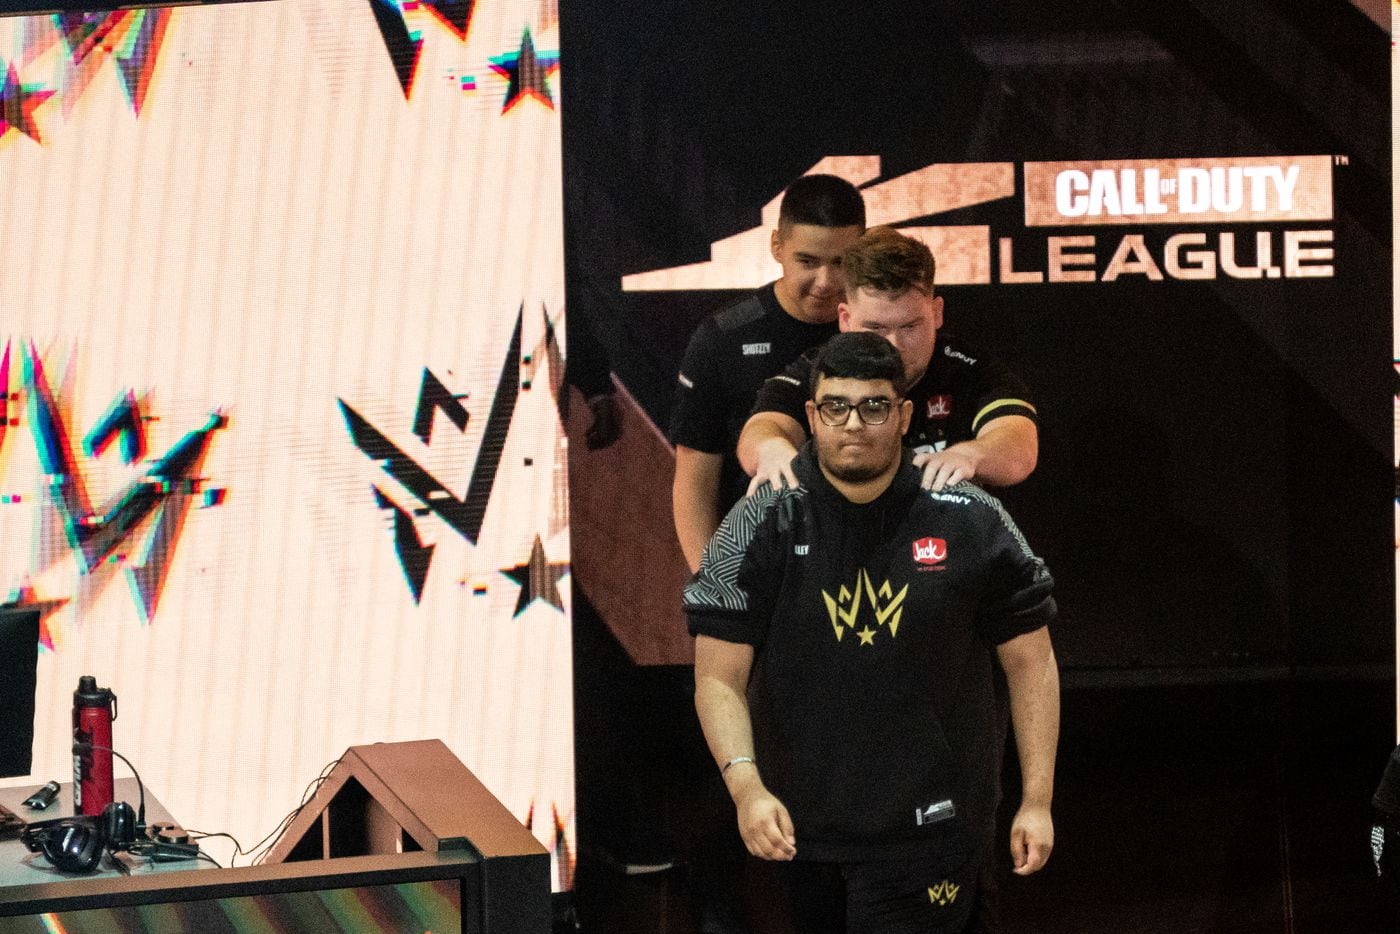 The Dallas Empire is introduced at the start winners final of the Call of Duty league playoffs against the Atlanta FaZe  at the Galen Center on Saturday, August 21, 2021 in Los Angeles, California. The Empire lost to FaZe 0 - 3 in their first match of the day but are still in contention to play in the finals through the elimination finals. (Justin L. Stewart/Special Contributor)